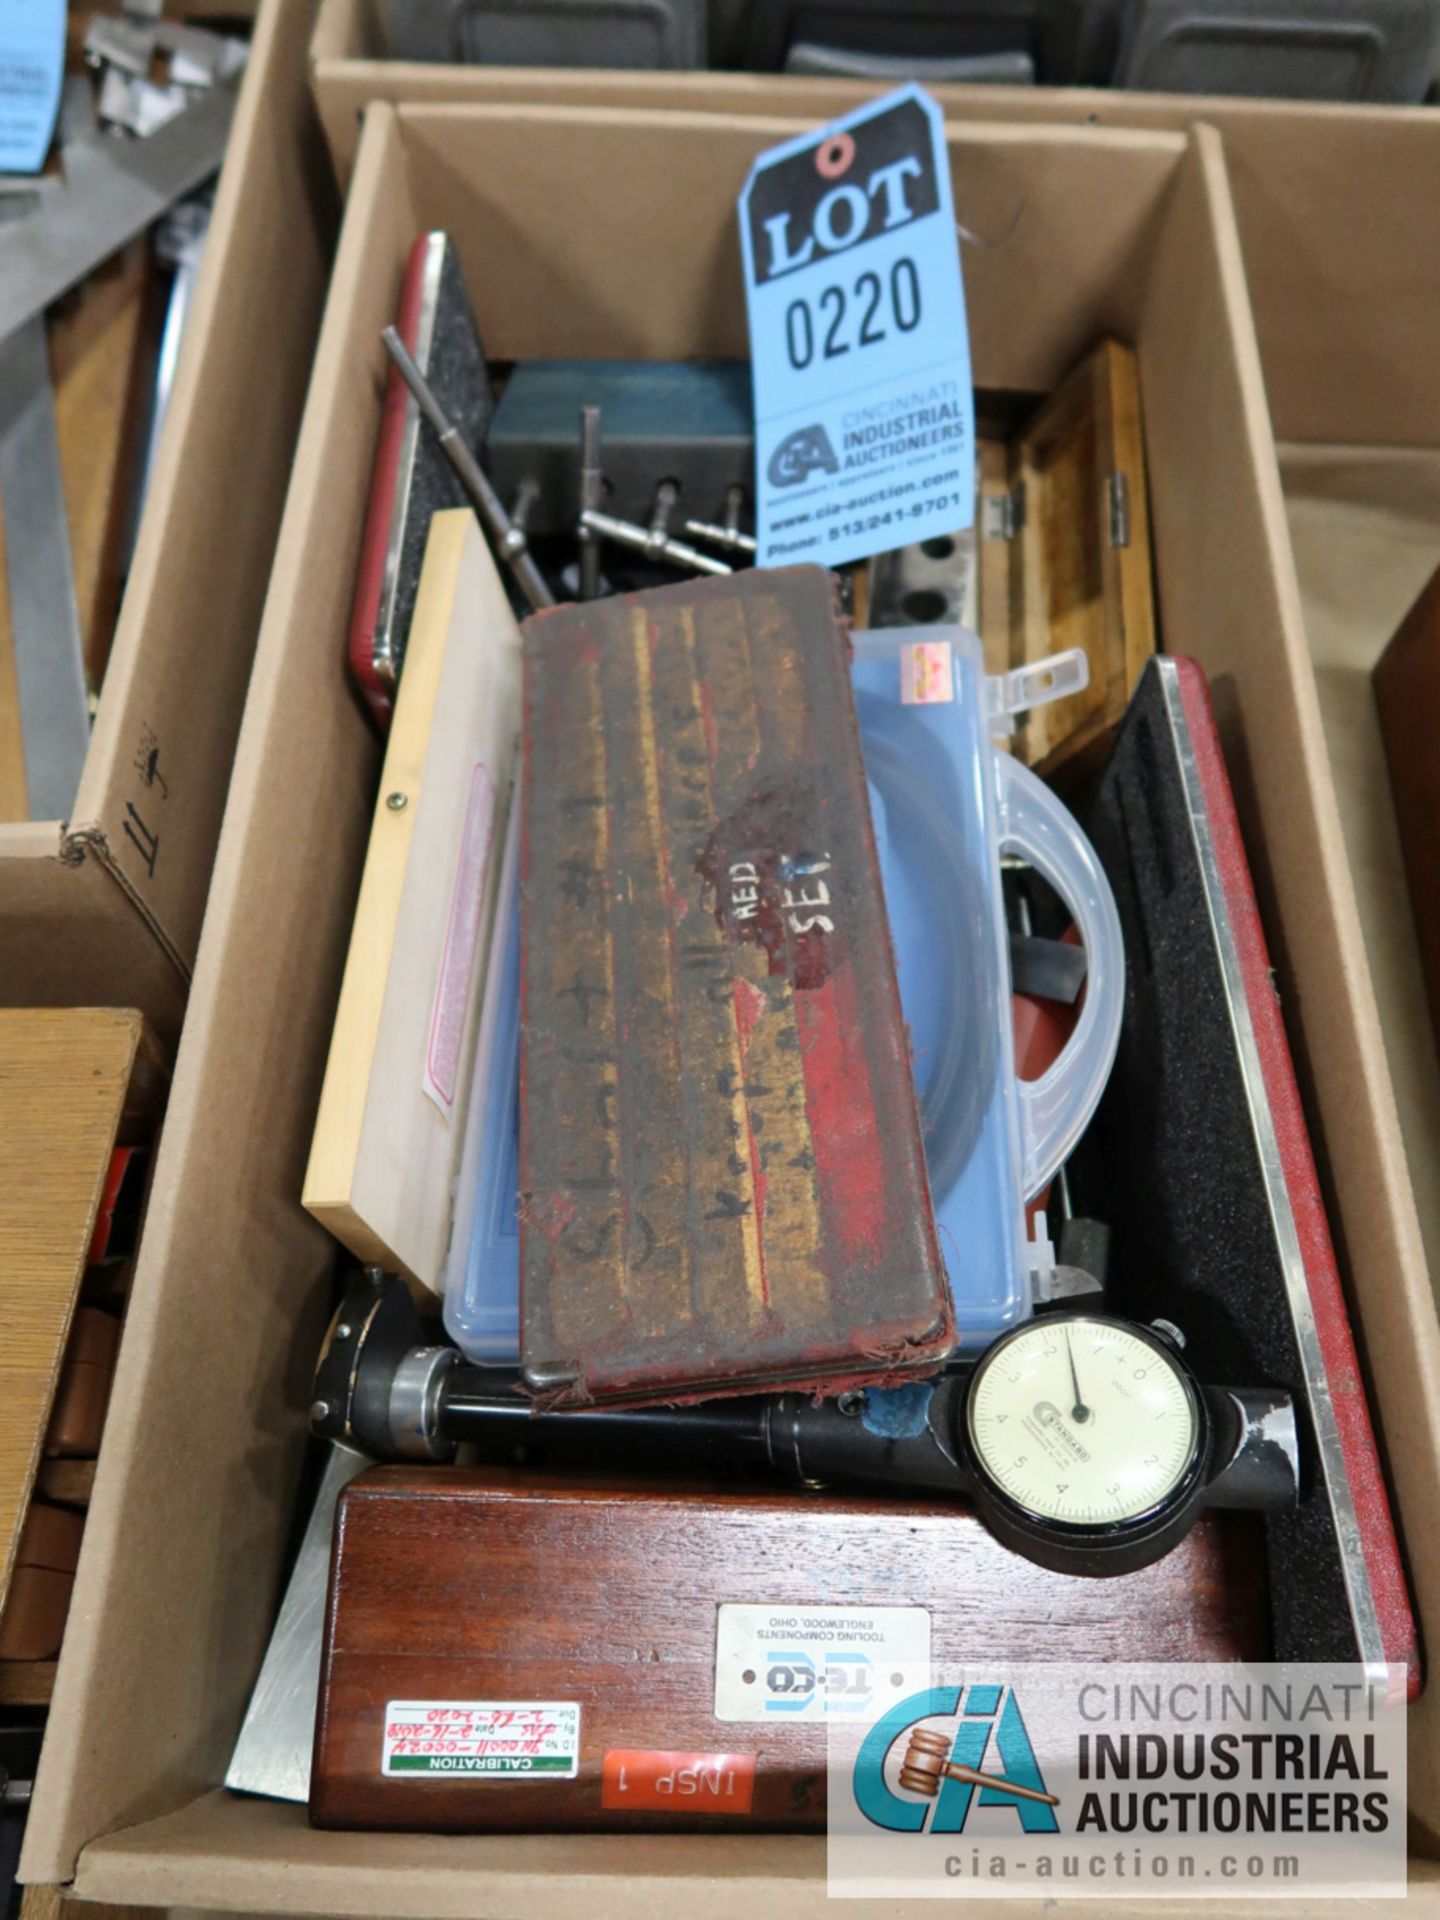 (LOT) ASSORTED INSPECTION ITEMS - DEPTH GAGE, THREAD GAGES, RETRACTOR METER, ETCHER, SNAP GAGE, DIAL